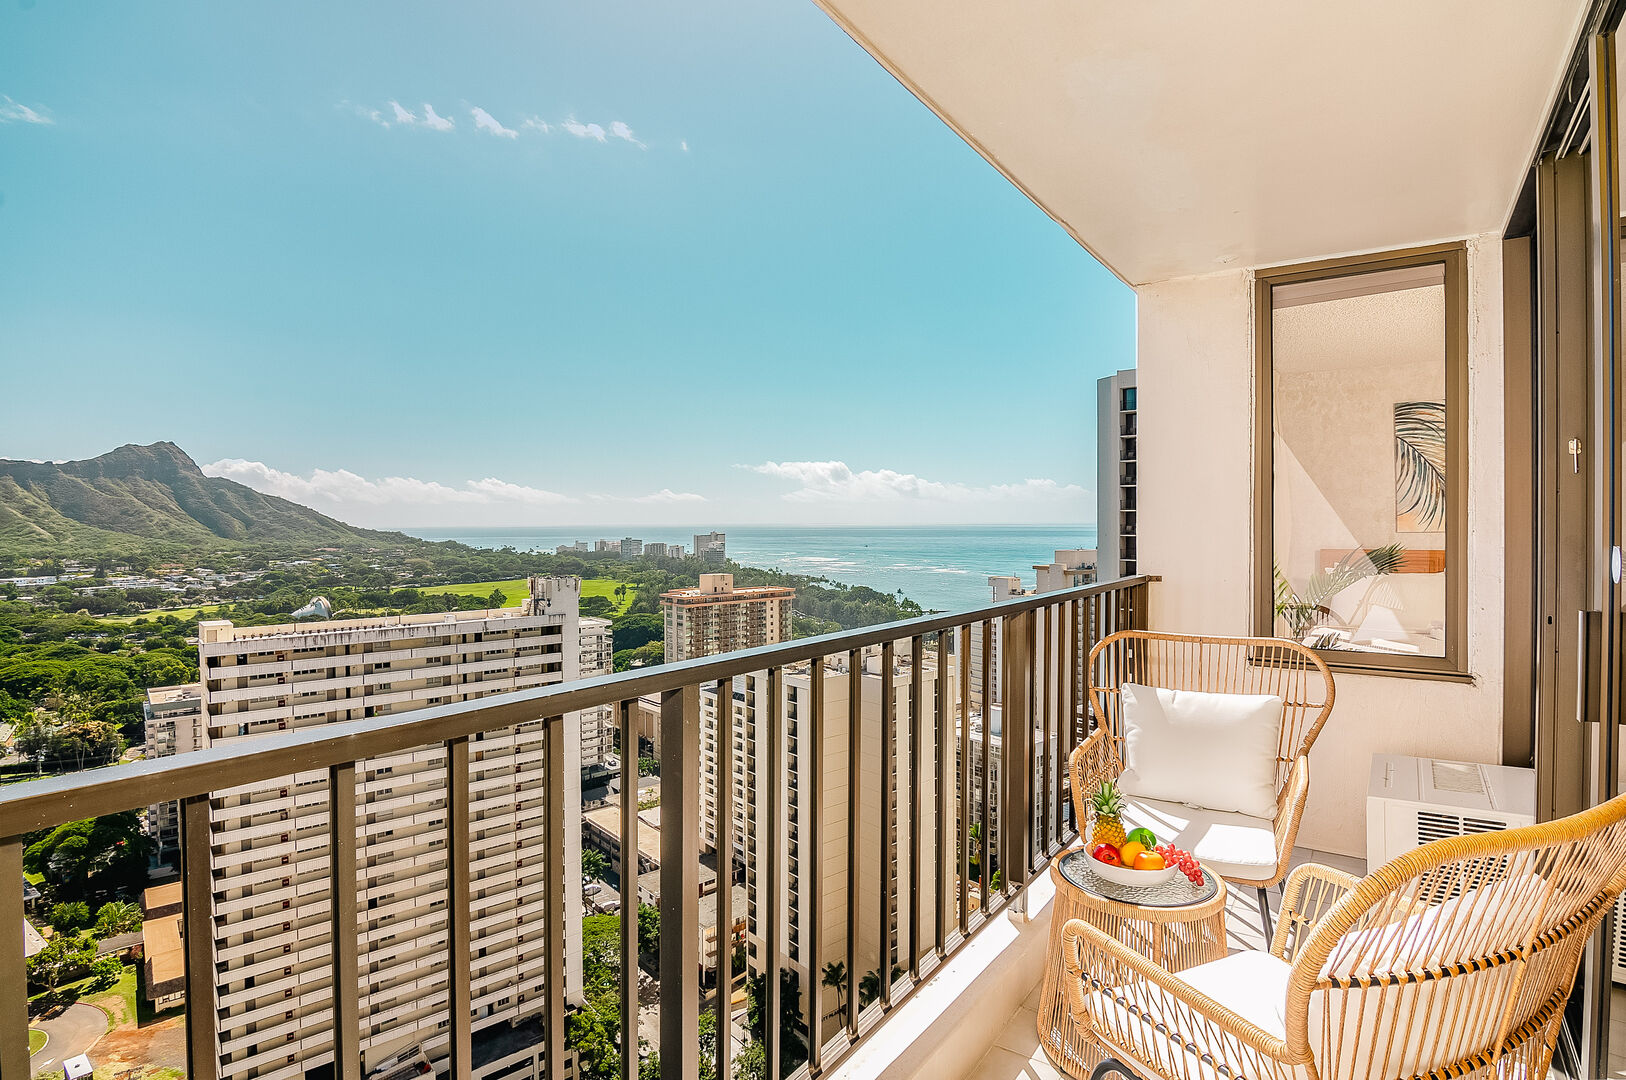 Have your morning coffee on your private balcony with stunning diamond head and ocean views!